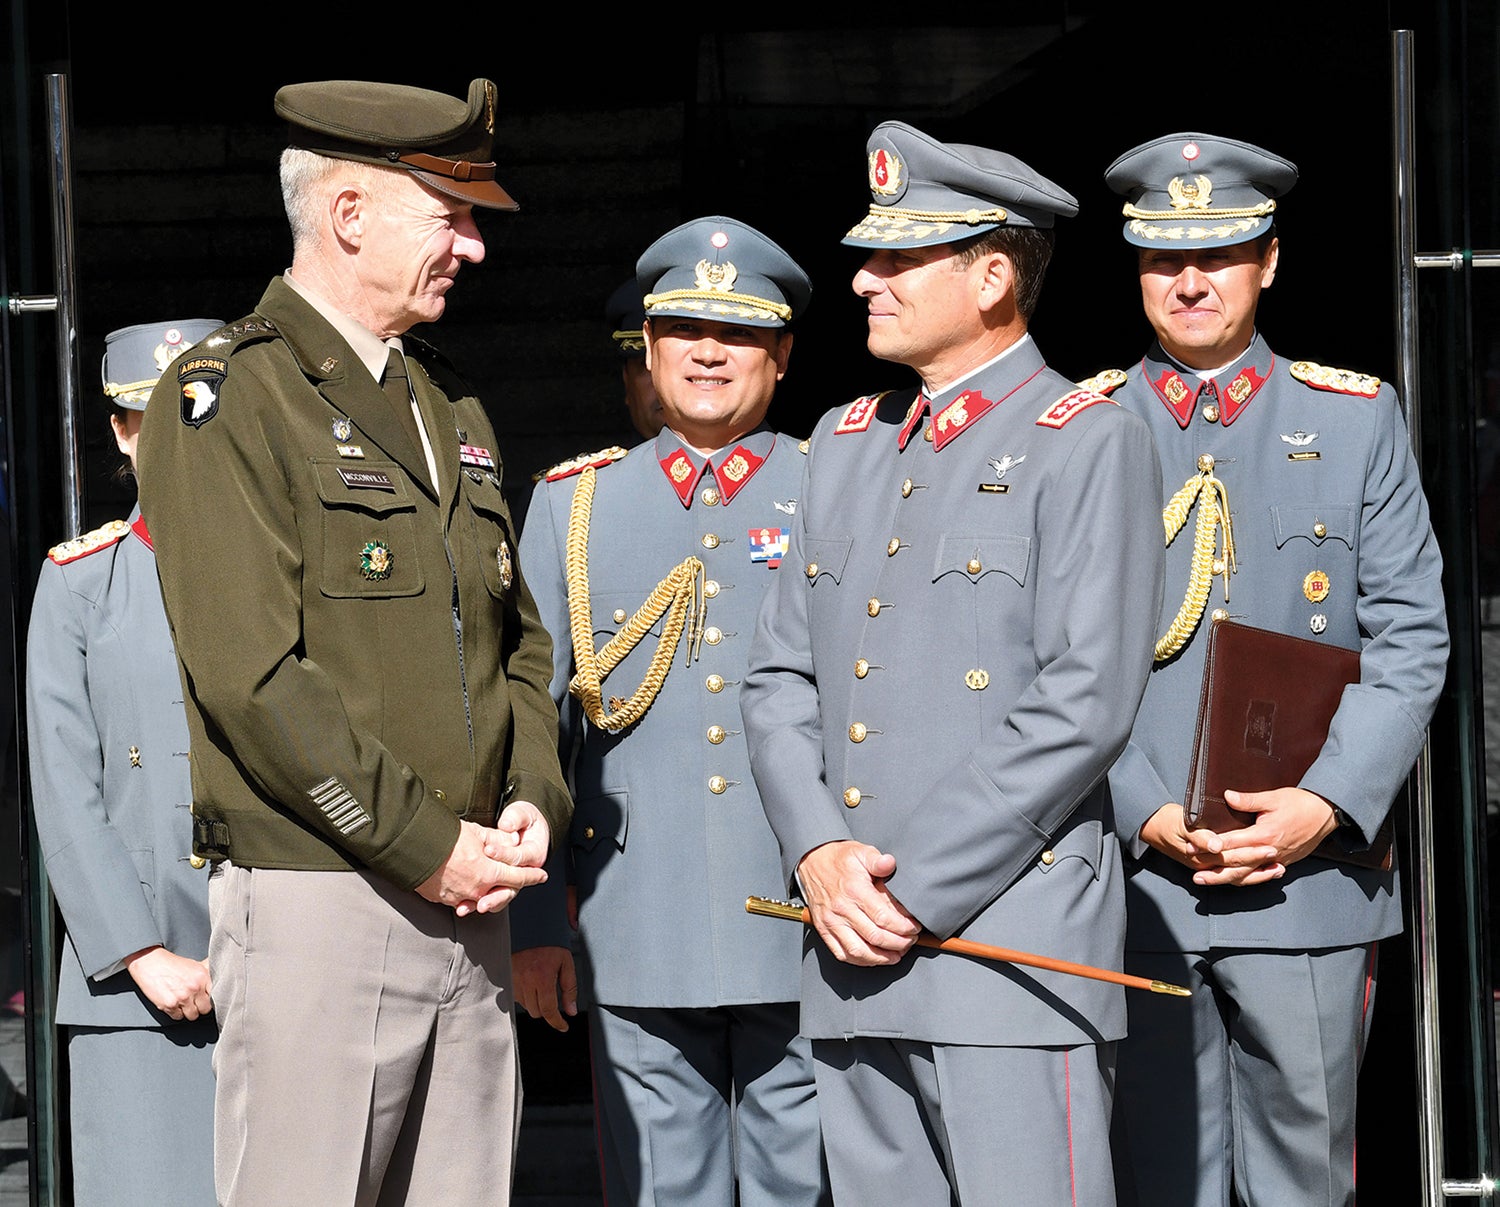 Army Chief of Staff Gen. James McConville, left, meets with members of the Chilean army during a visit to Chile in February. (Credit: U.S. Army/Master Sgt. Joseph Moore)